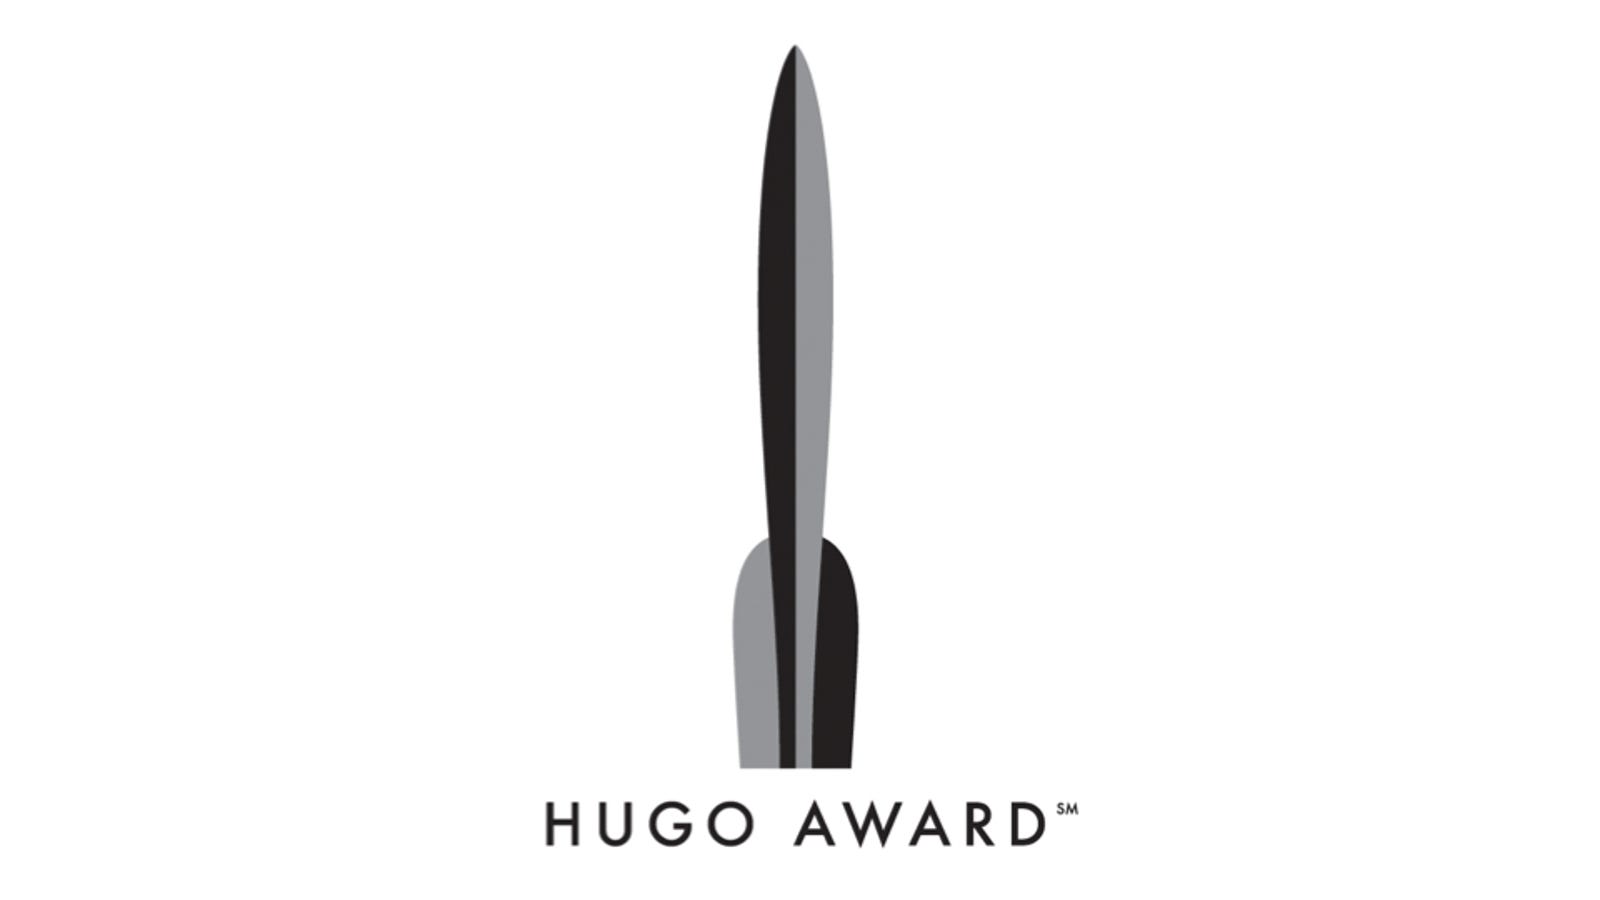 The nominees for the 2013 Hugo Awards have been announced!